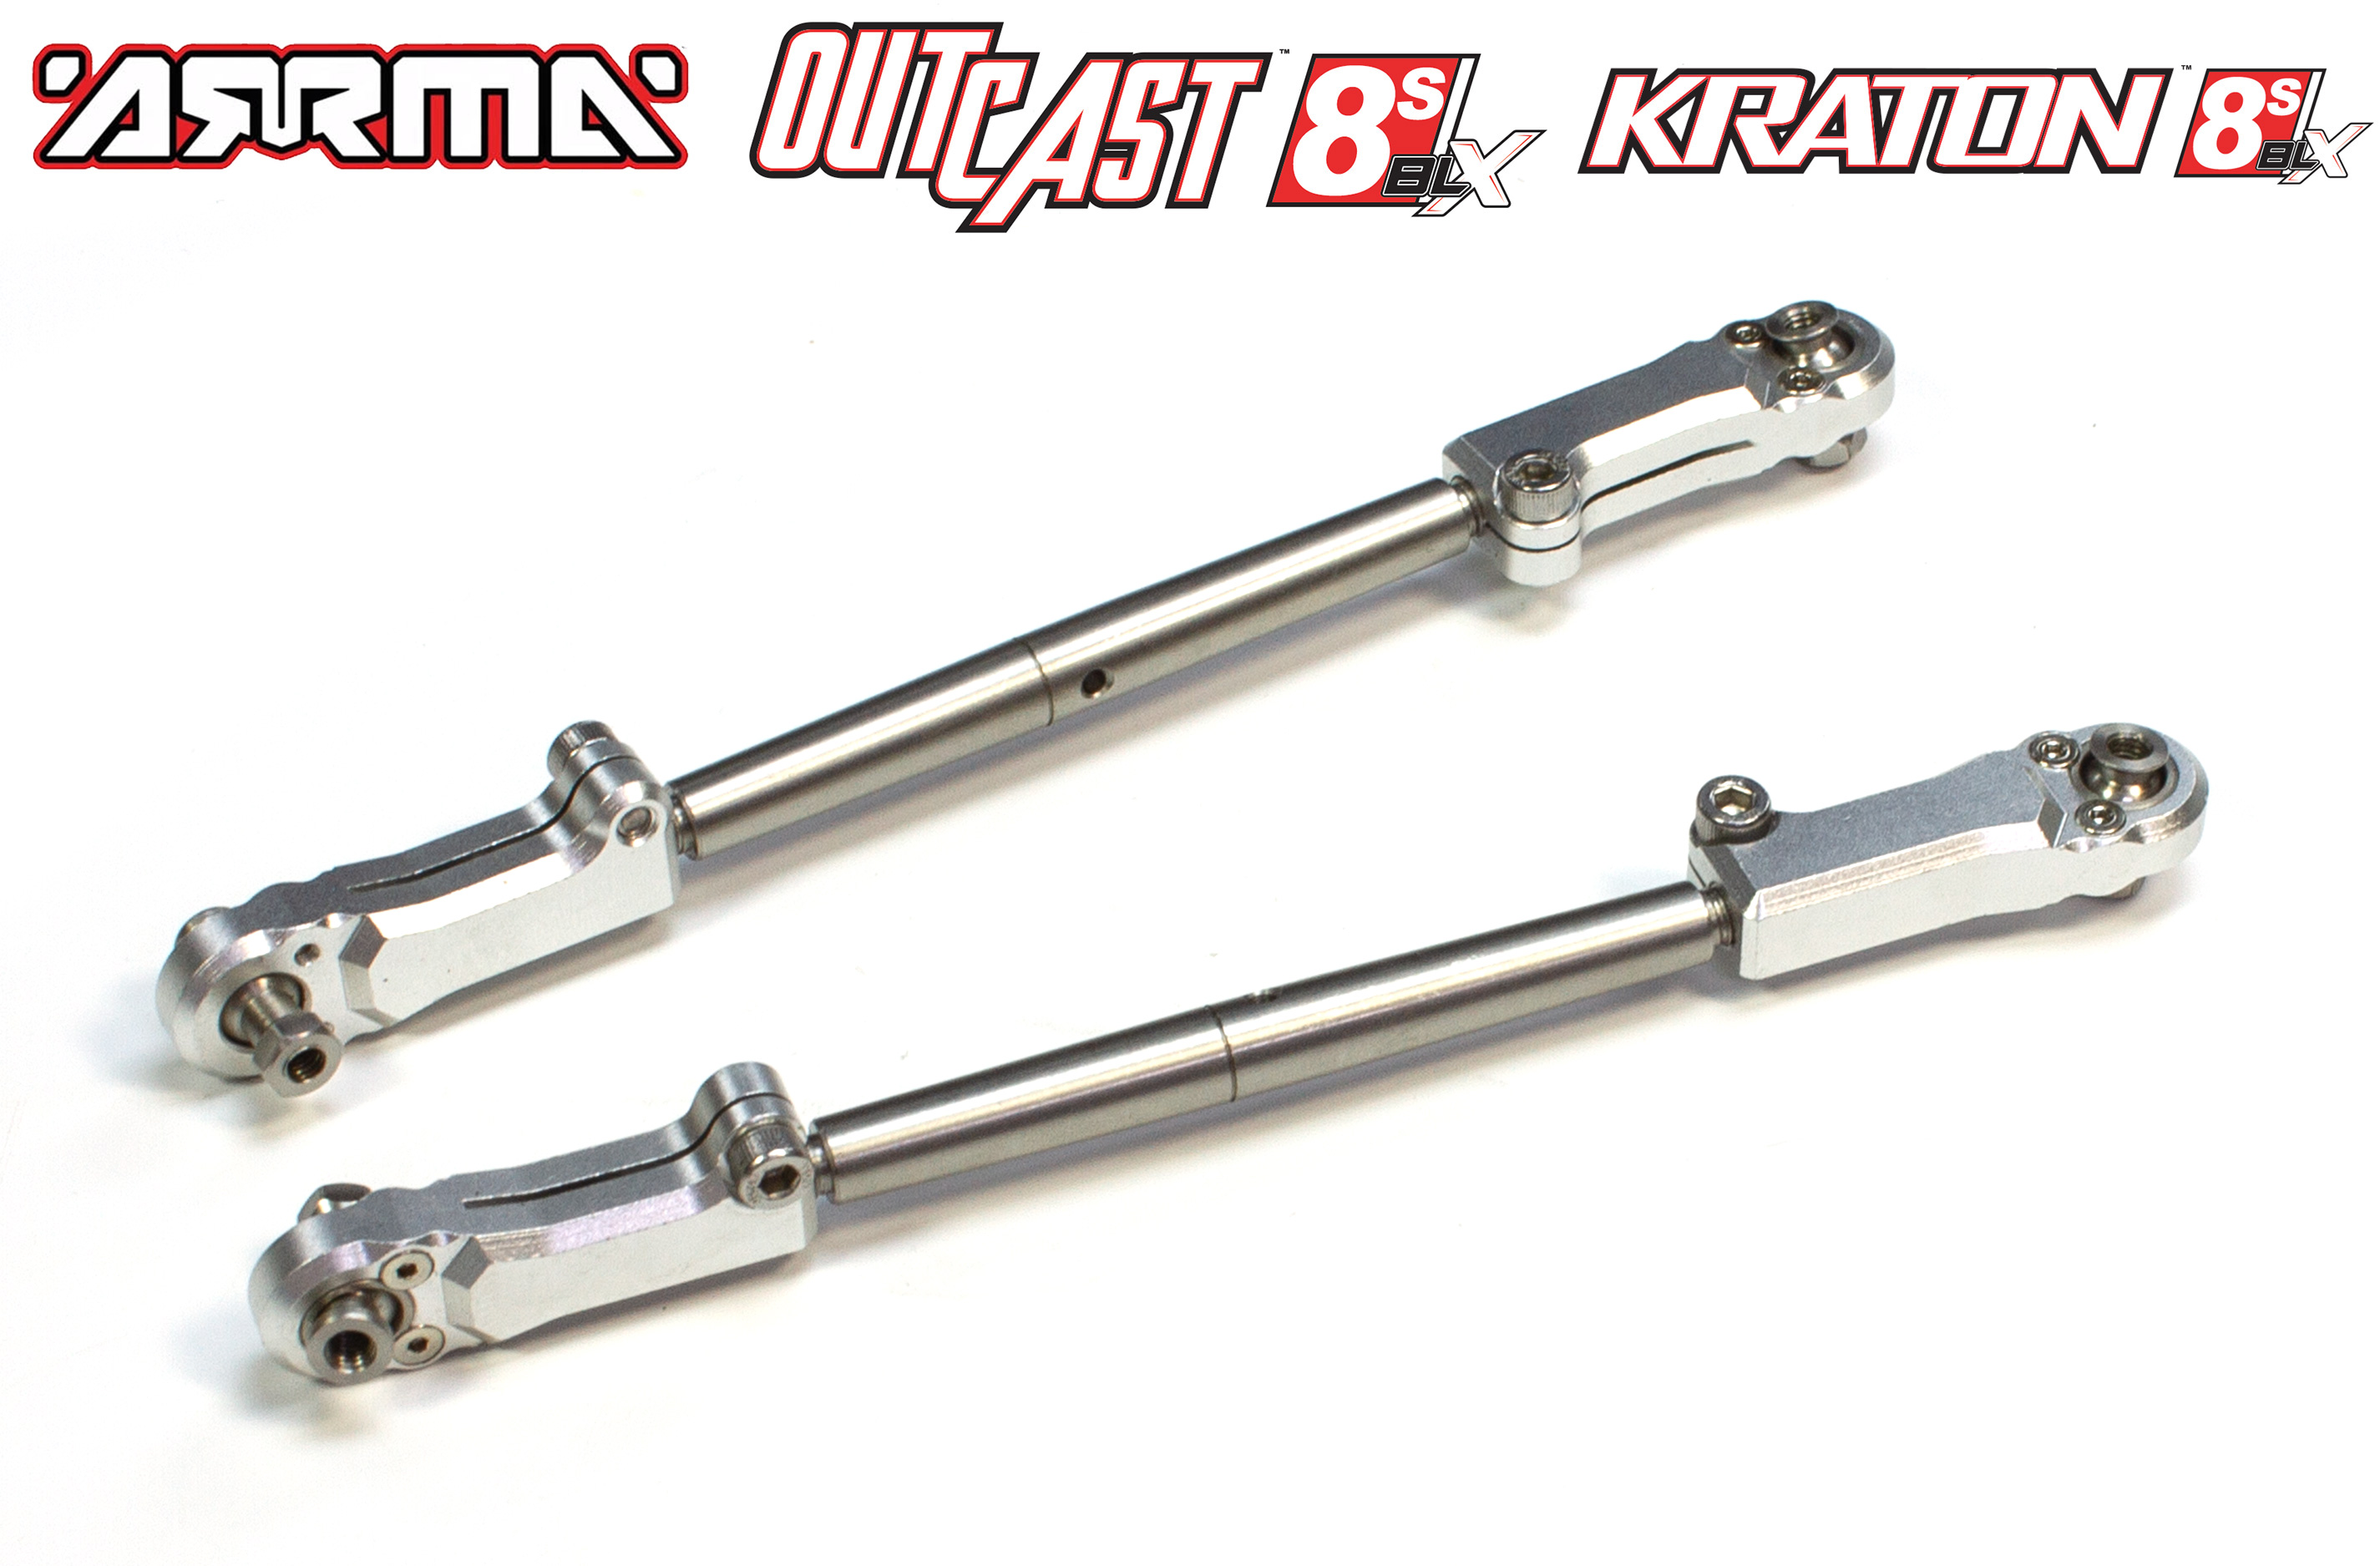 AKX162 GPM all-metal steering rods for Arrma Kraton / Outcast 8S